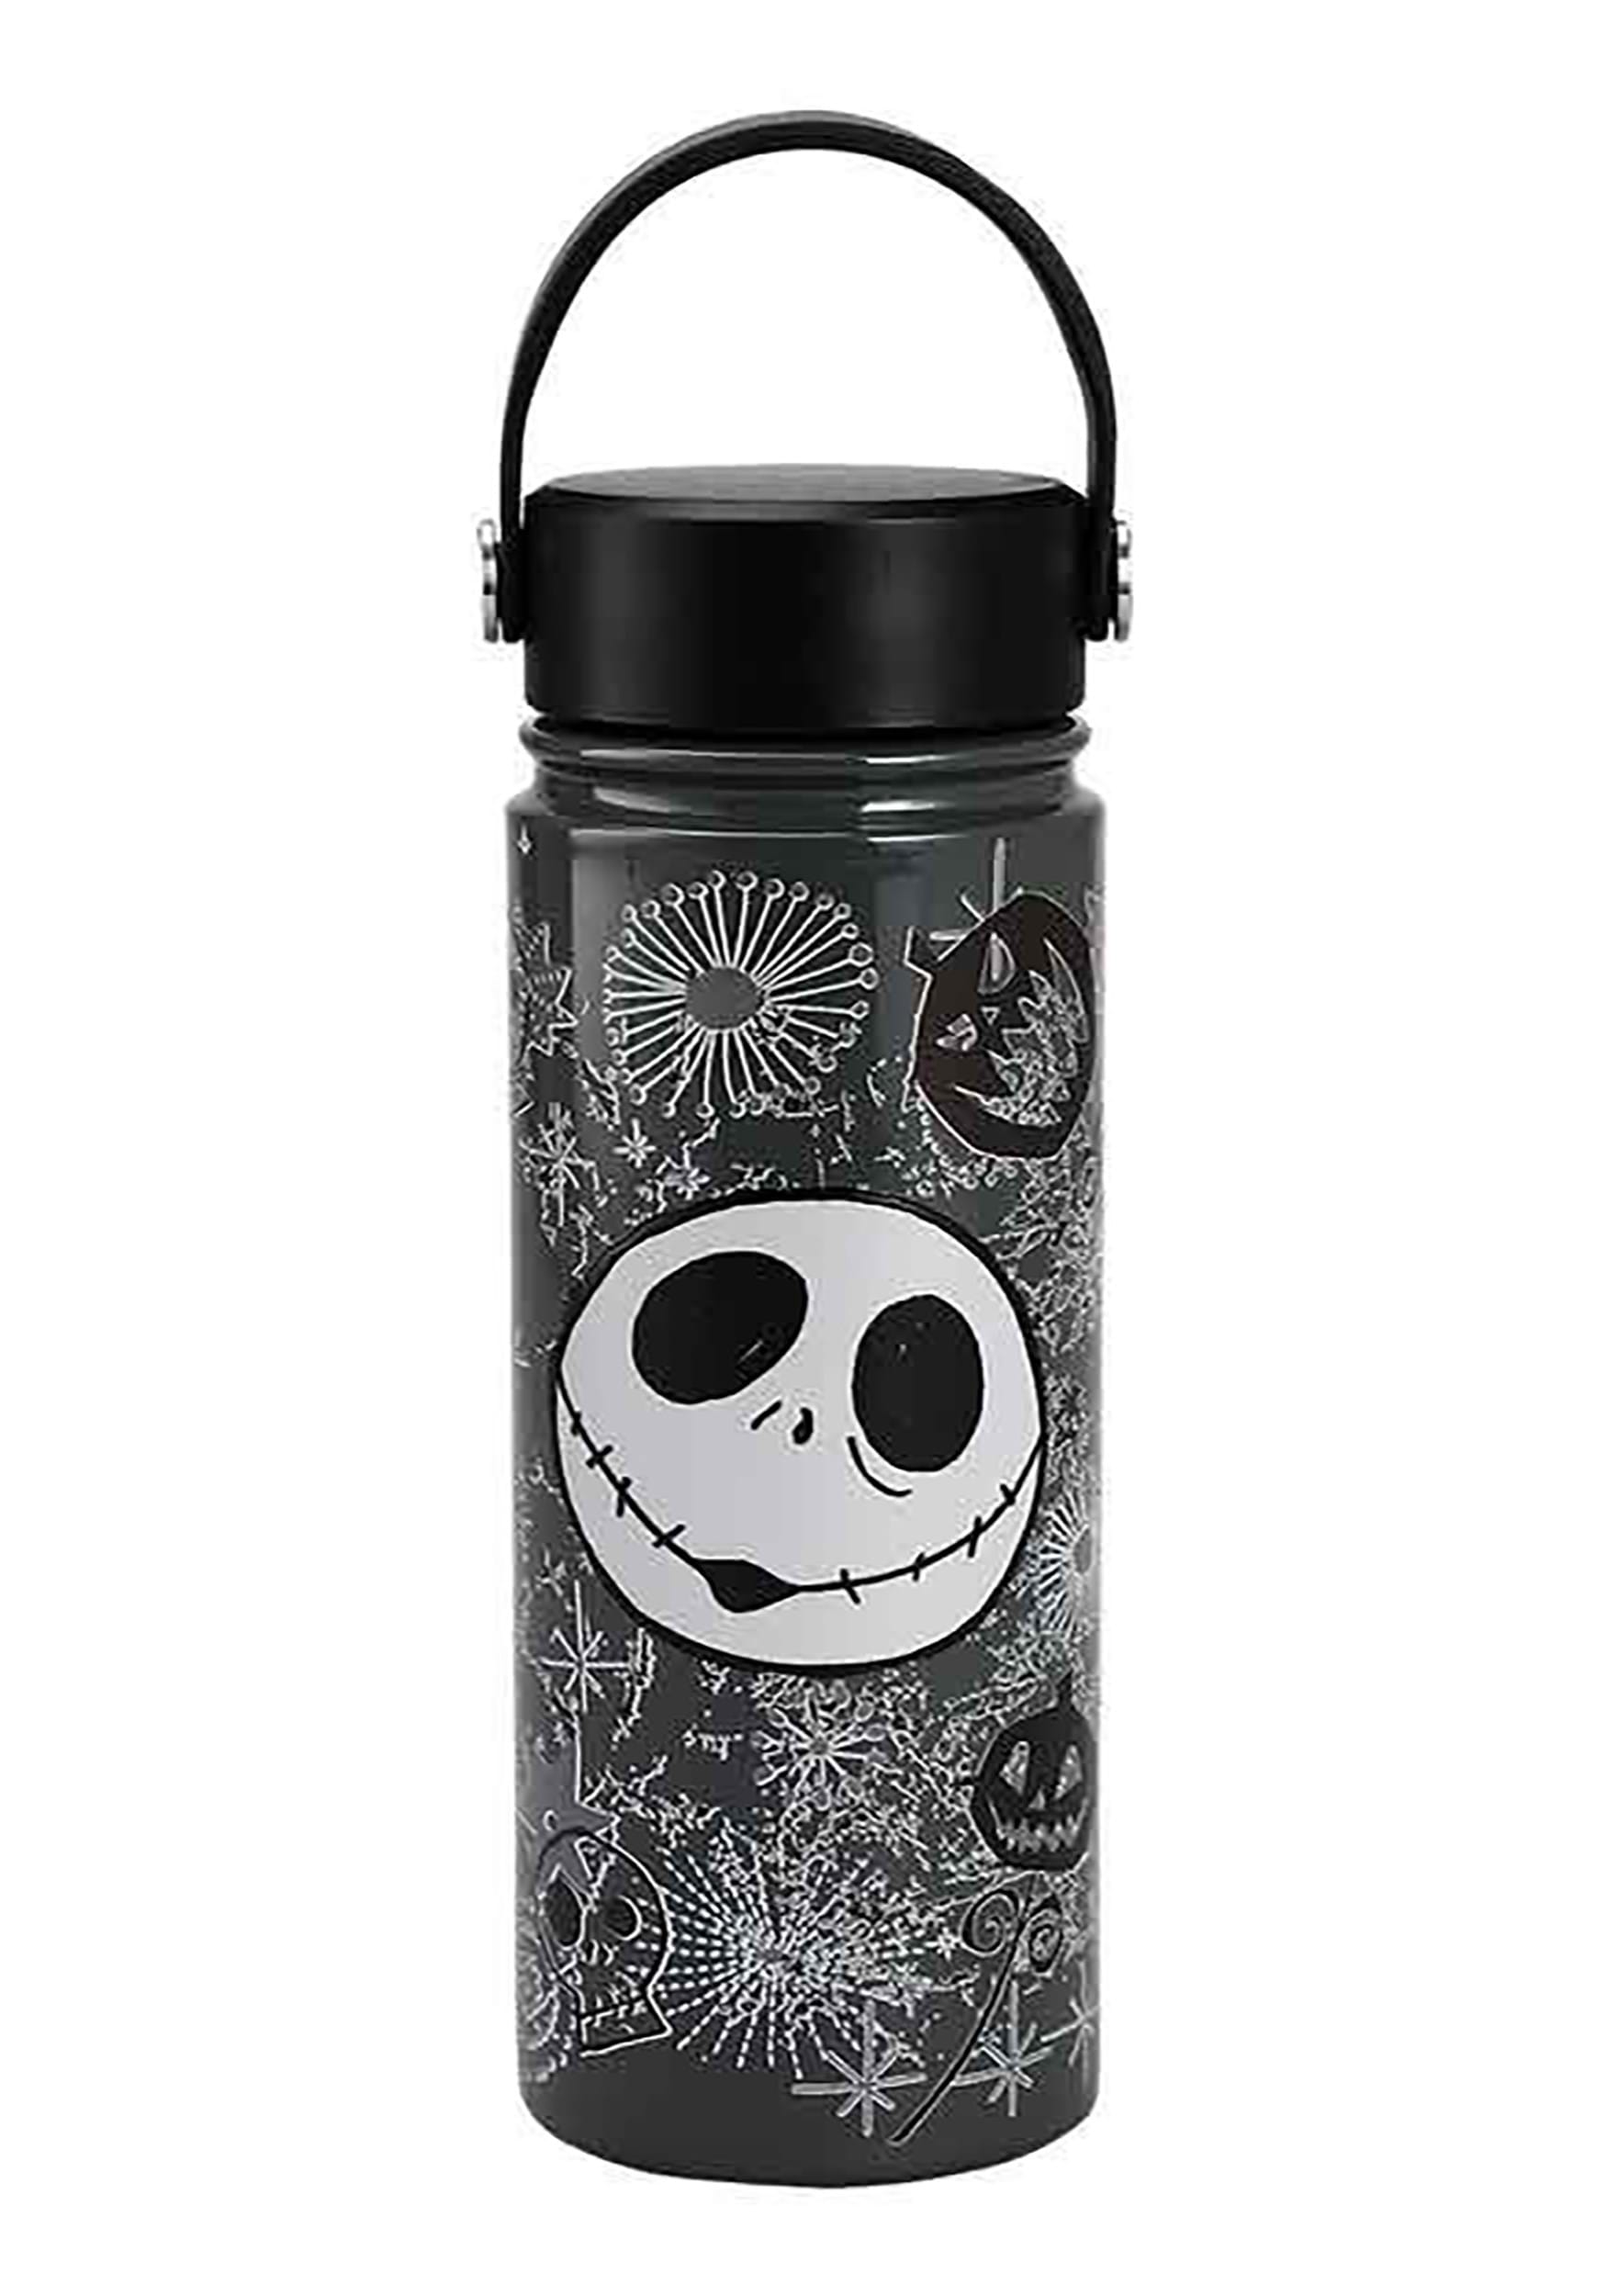 Everybot Stainless Steel Water Bottle